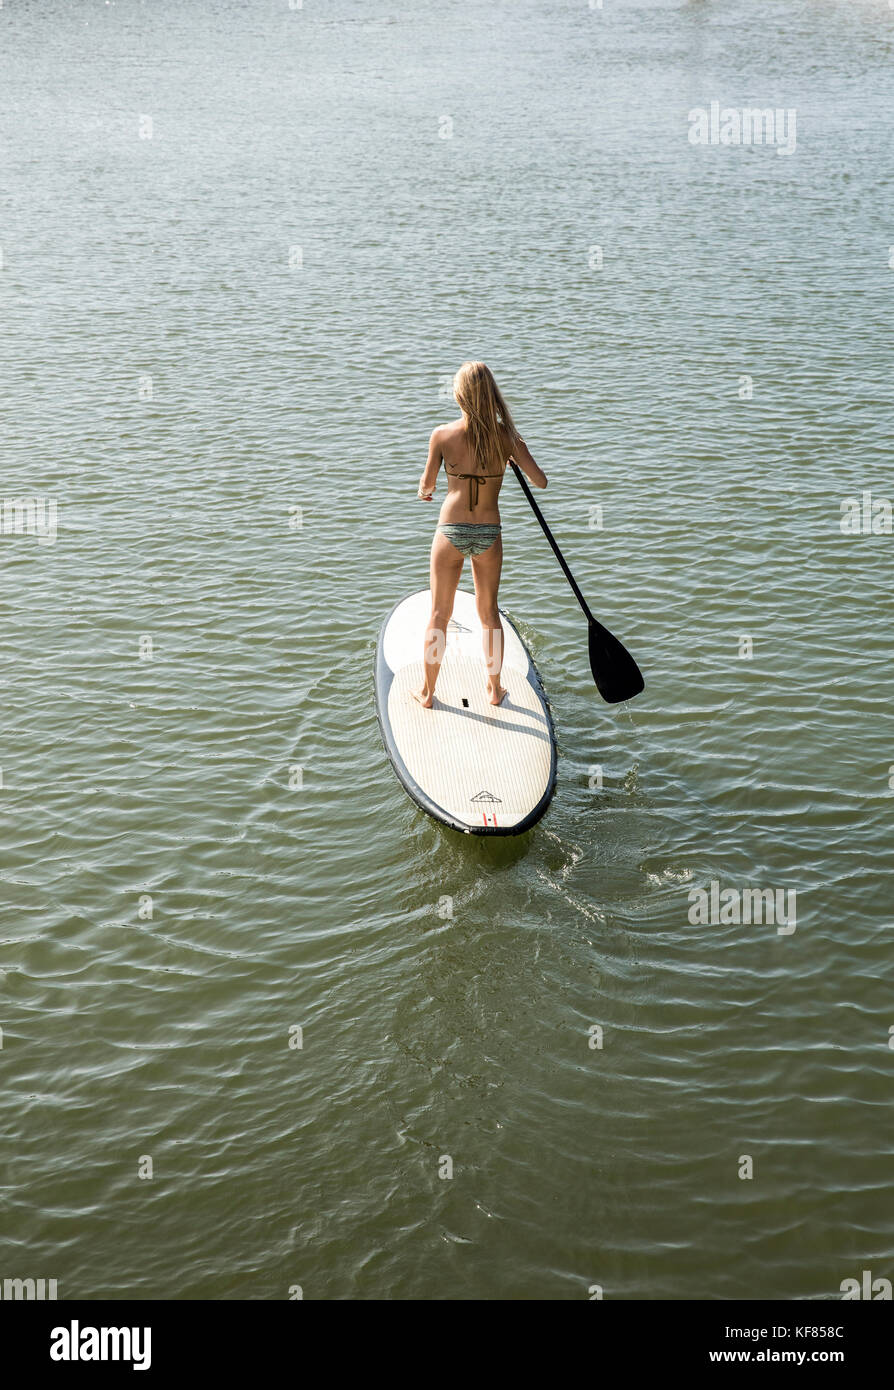 HAWAII, Oahu, North Shore, a young woman paddleboards on the Anahulu River below the historic Rainbow Bridge in the town of Haliewa Stock Photo